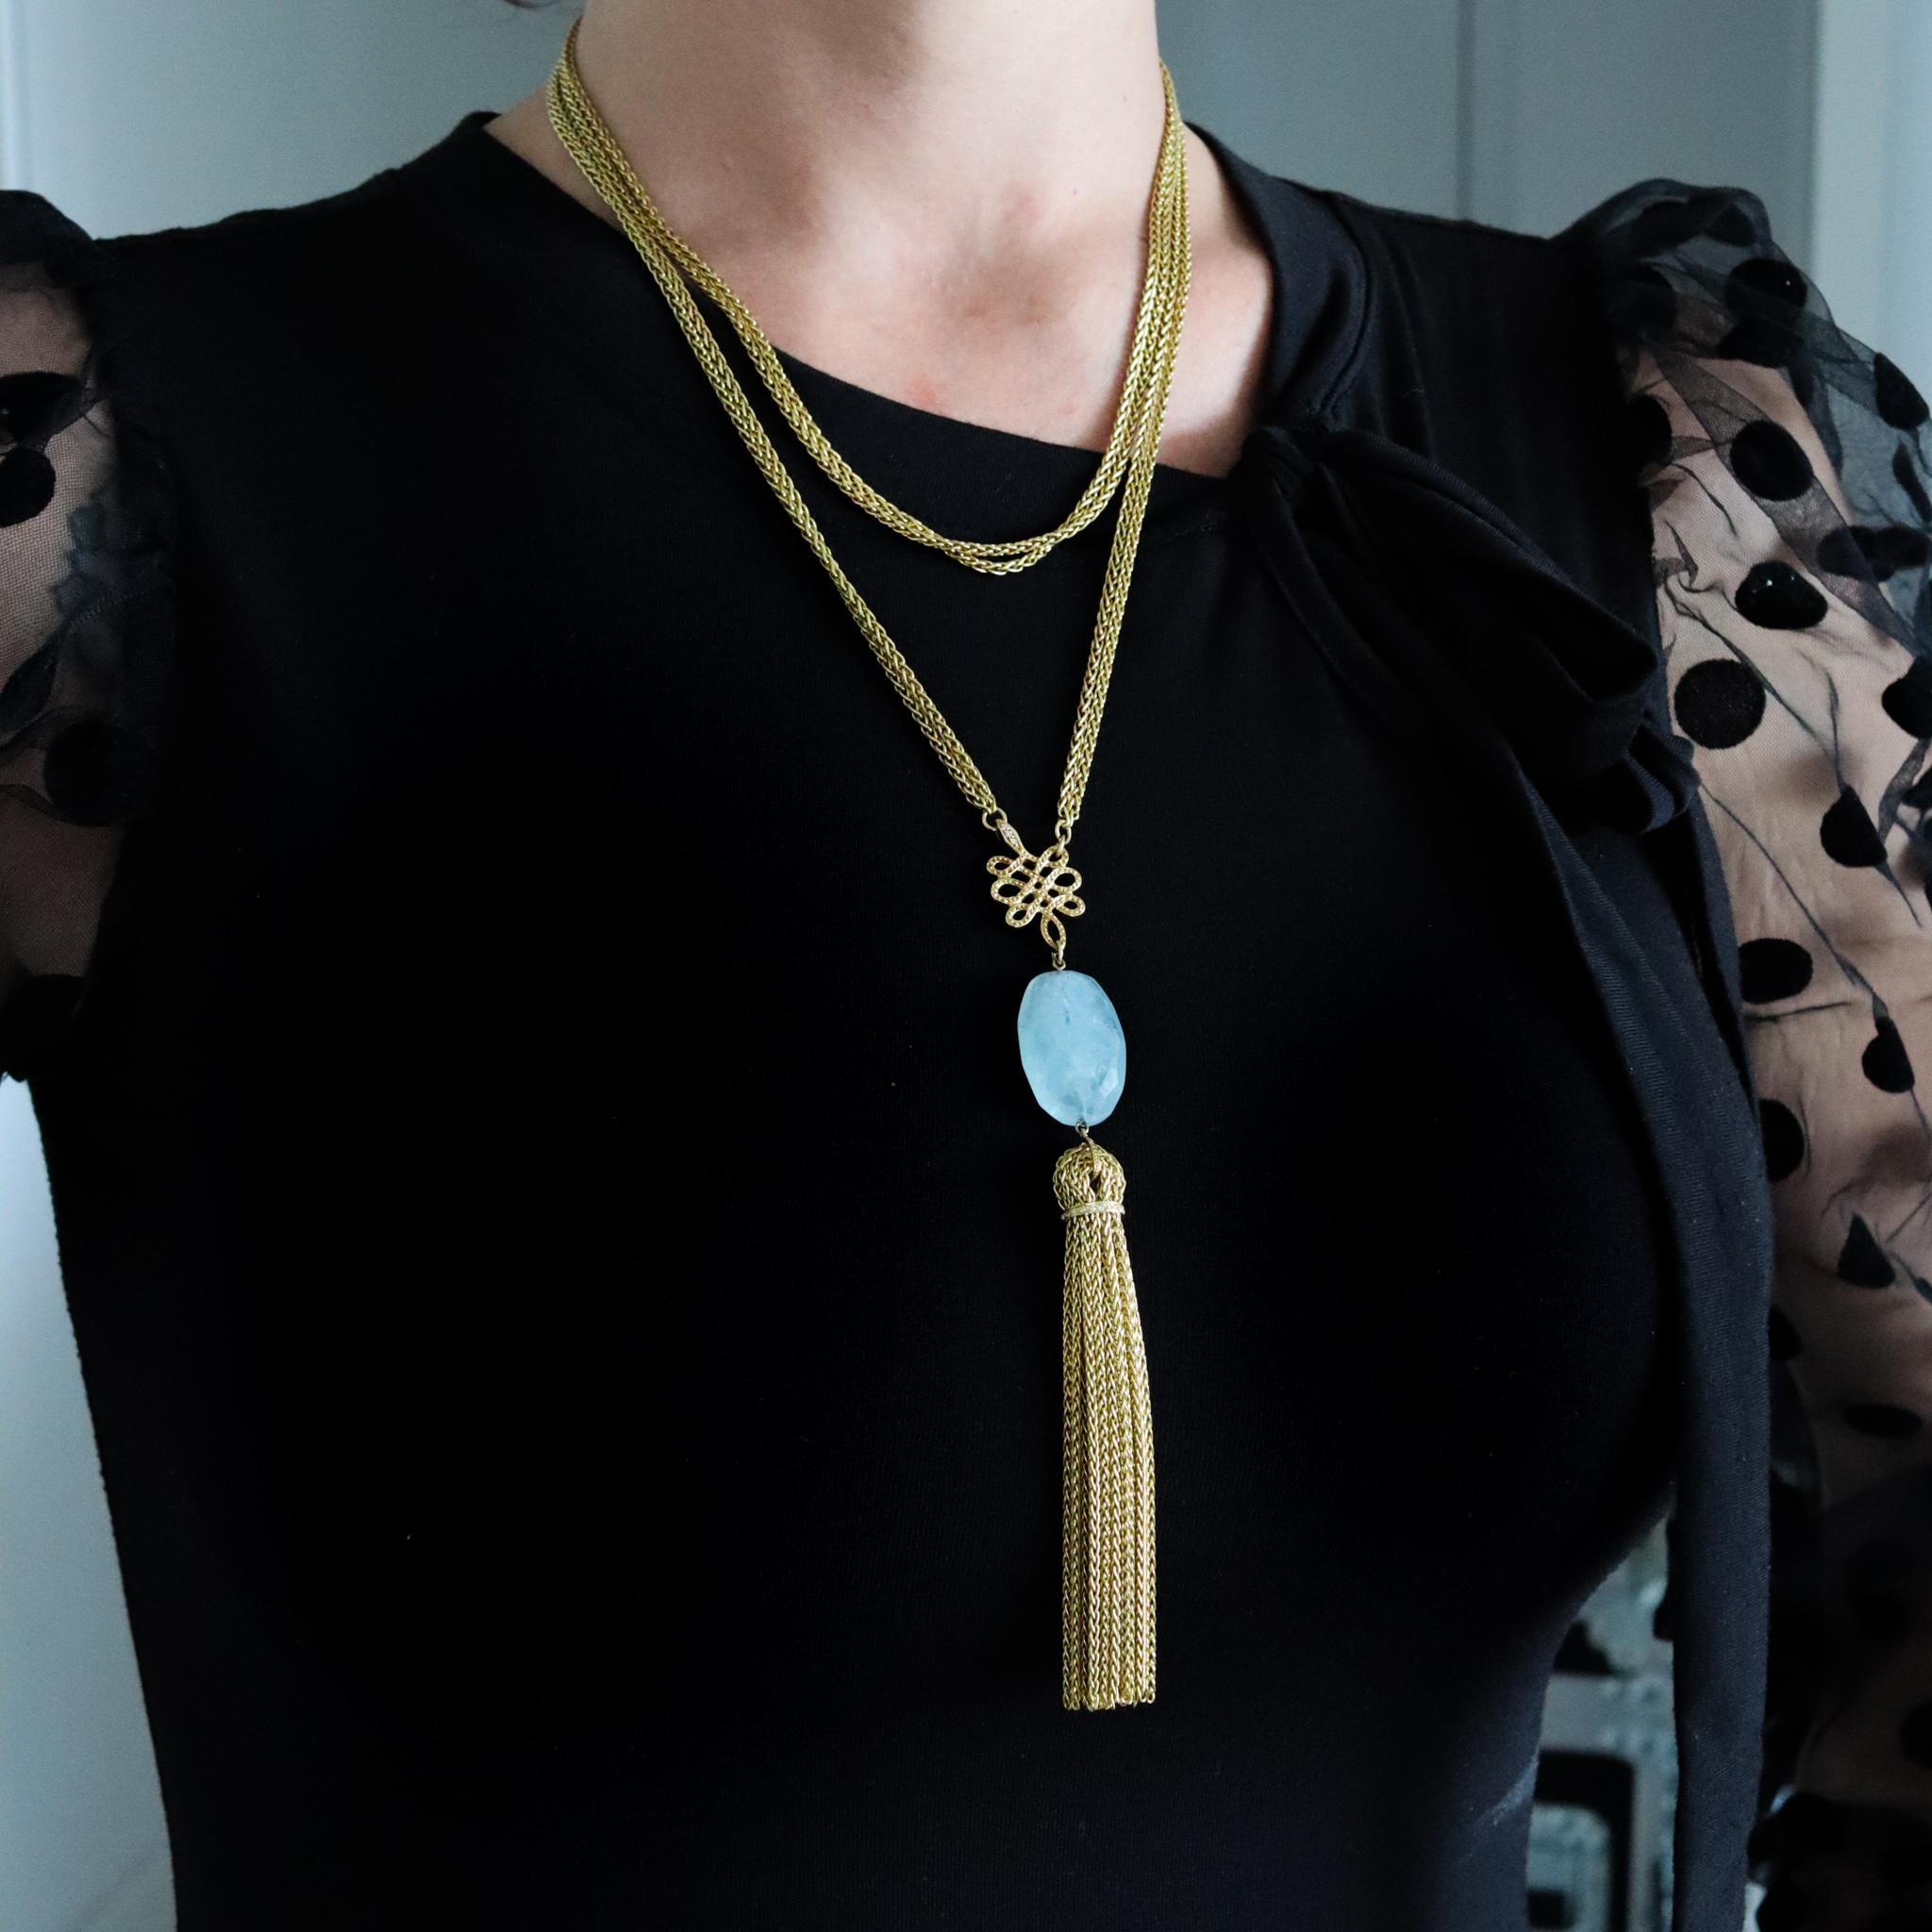 A tassel necklace designed by Diane Von Furstenberg for H. Stern.

Very modern piece created by the Brazilian jewelry house of H. Stern. This rare long necklace sautoir has been designed by Diane Von Furstenberg and crafted in solid rich yellow gold